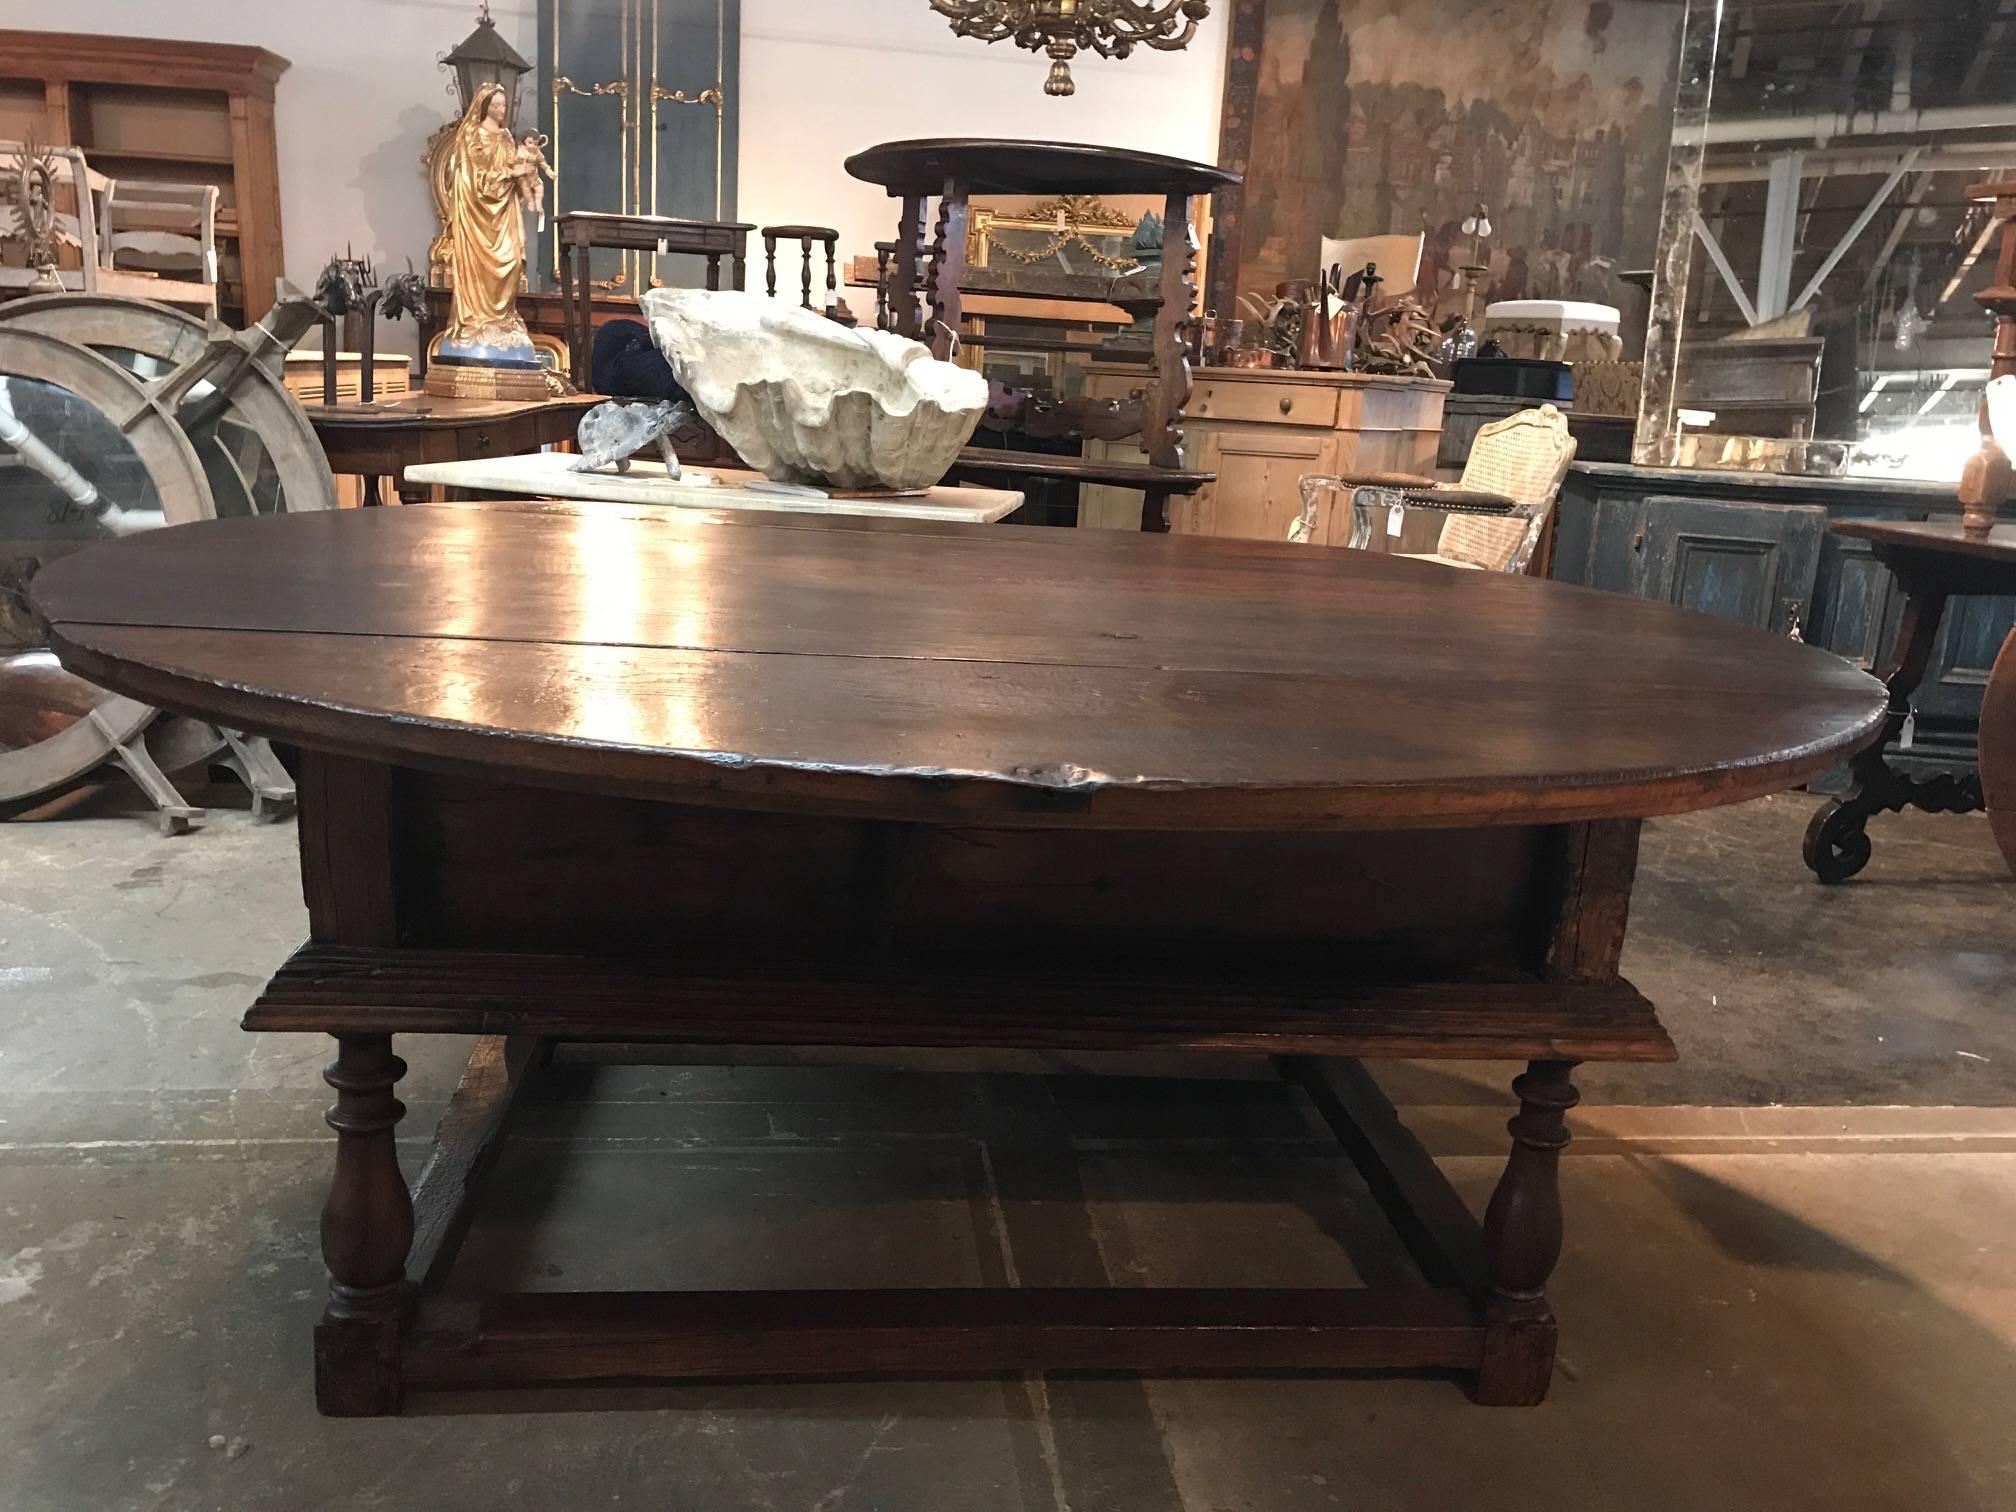 Outstanding and very rare early 18th century round table from Northern Italy. Exceptional construction in very sound chestnut with two large drop leaves and two drawers. The leaves have retracting iron supports to maintain the leaves in place once